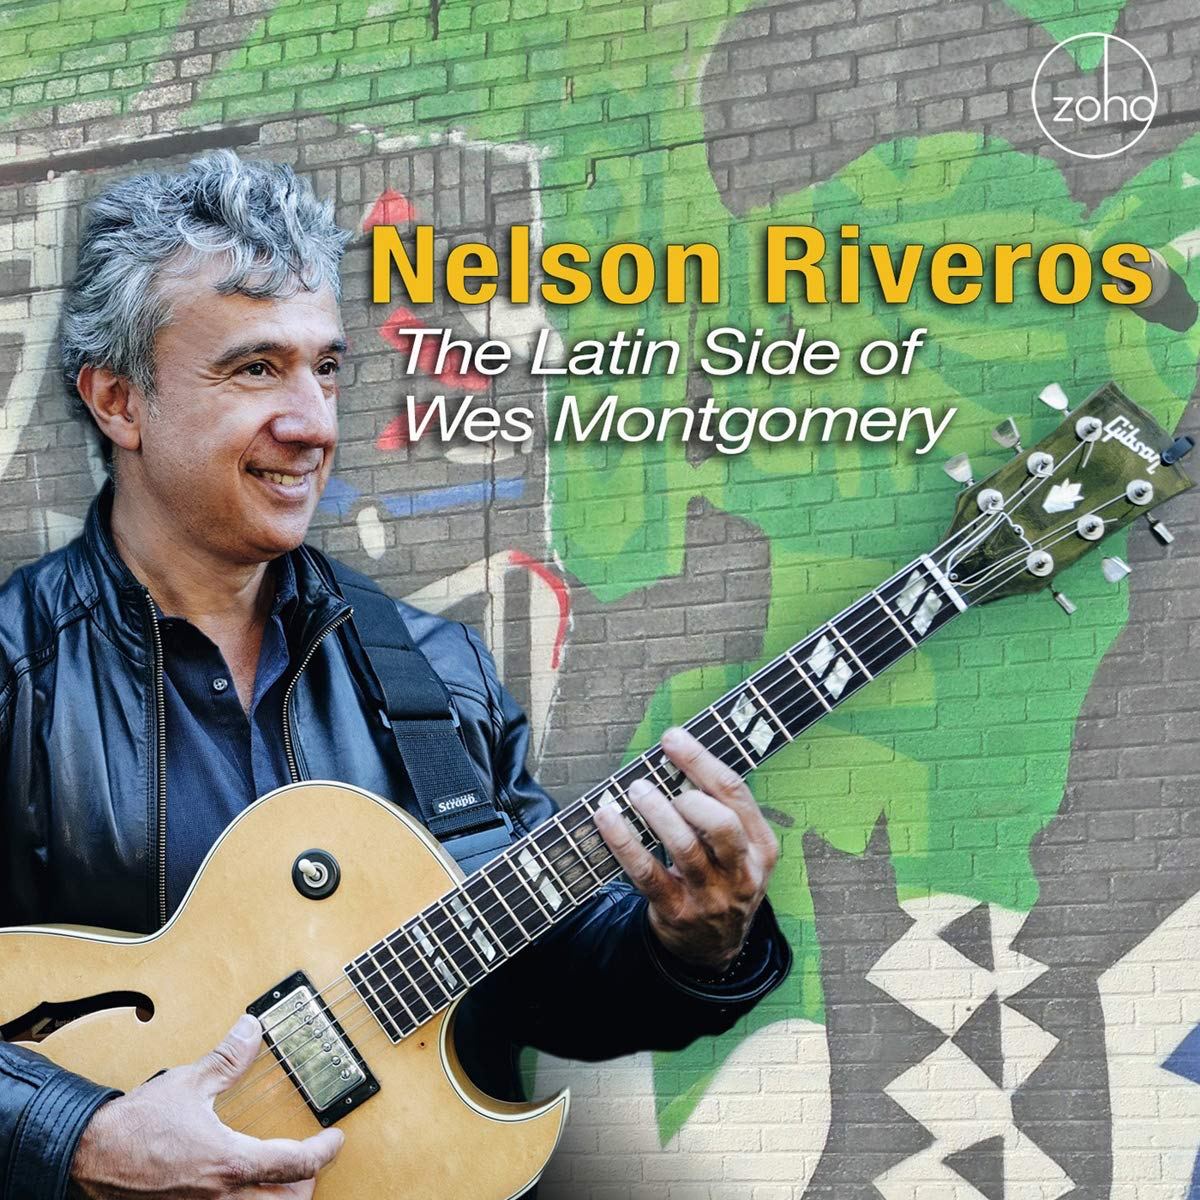 Nelson Riveros • The Latin Side of Wes Montgomery®️2021 #podcast